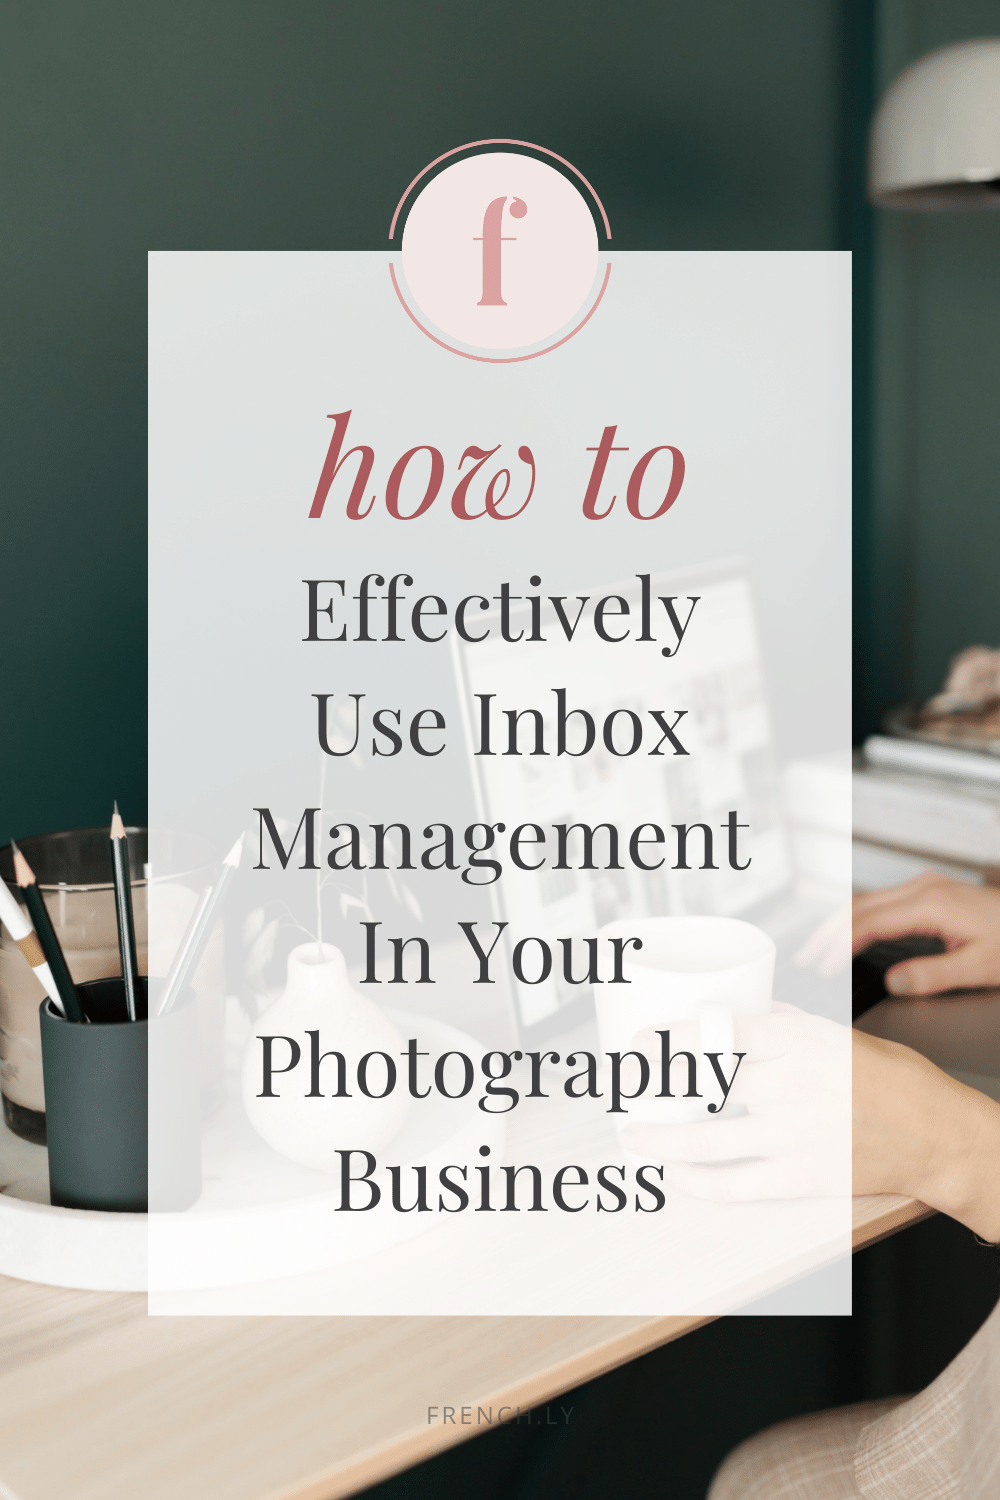 How to Effectively Use Inbox Management In Your Photography Business | Frenchly Food + Product Photography